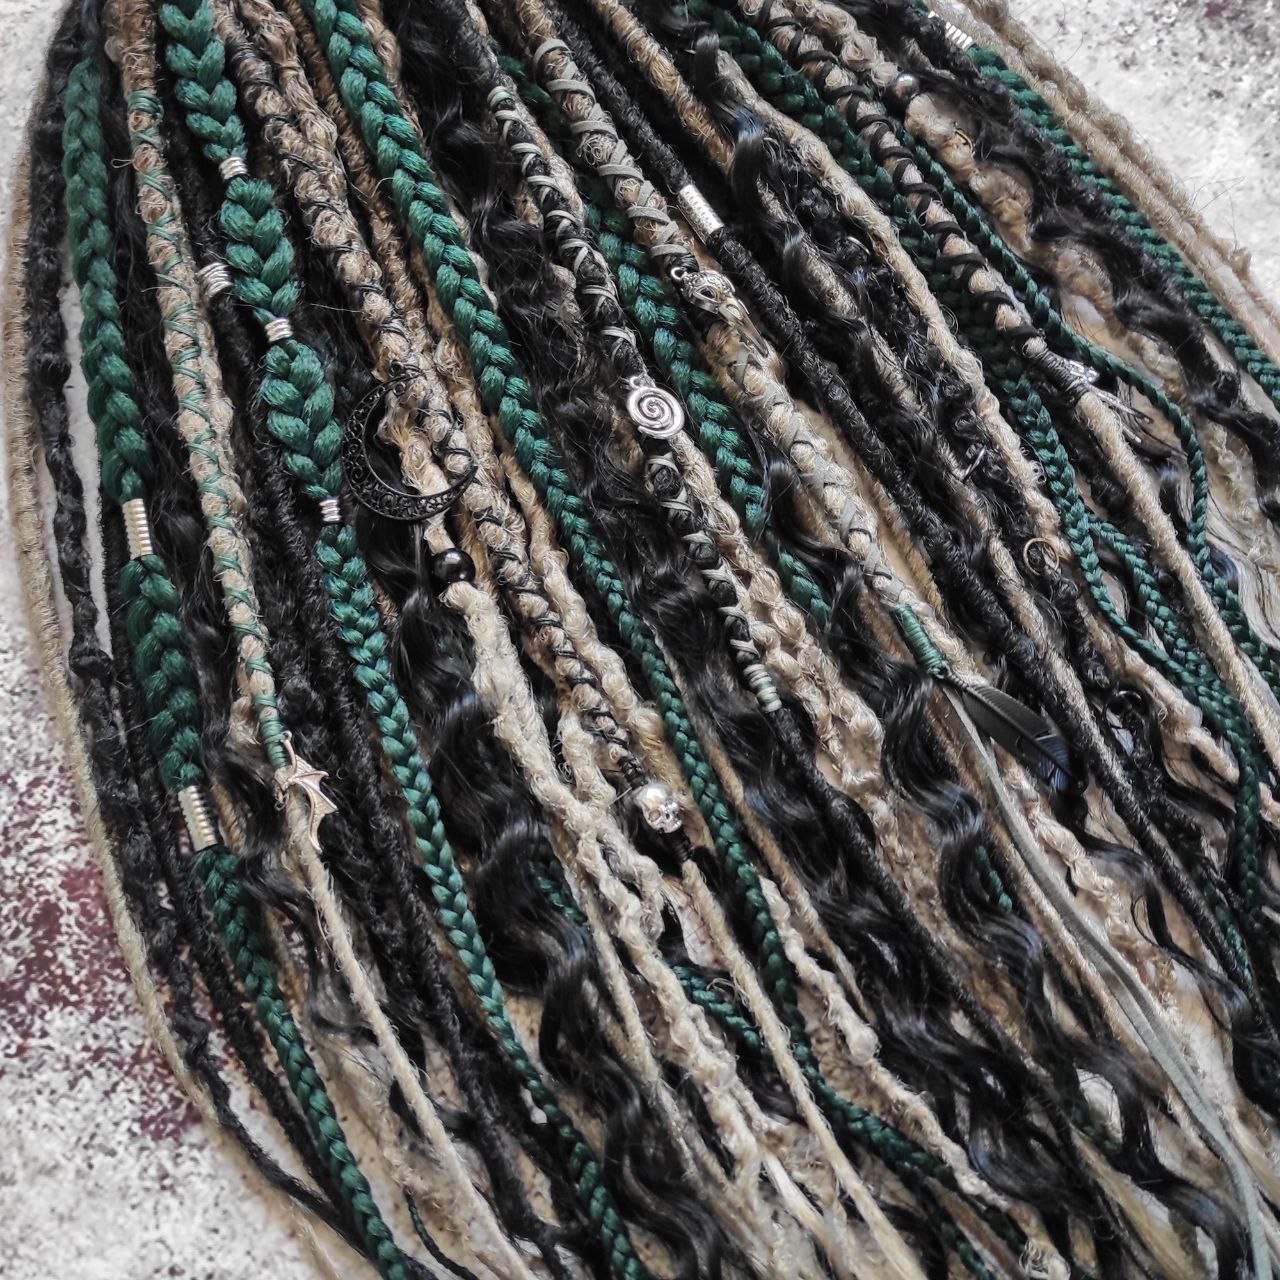 Dark Forest Elf Dreads Gray Black and Green with Curls